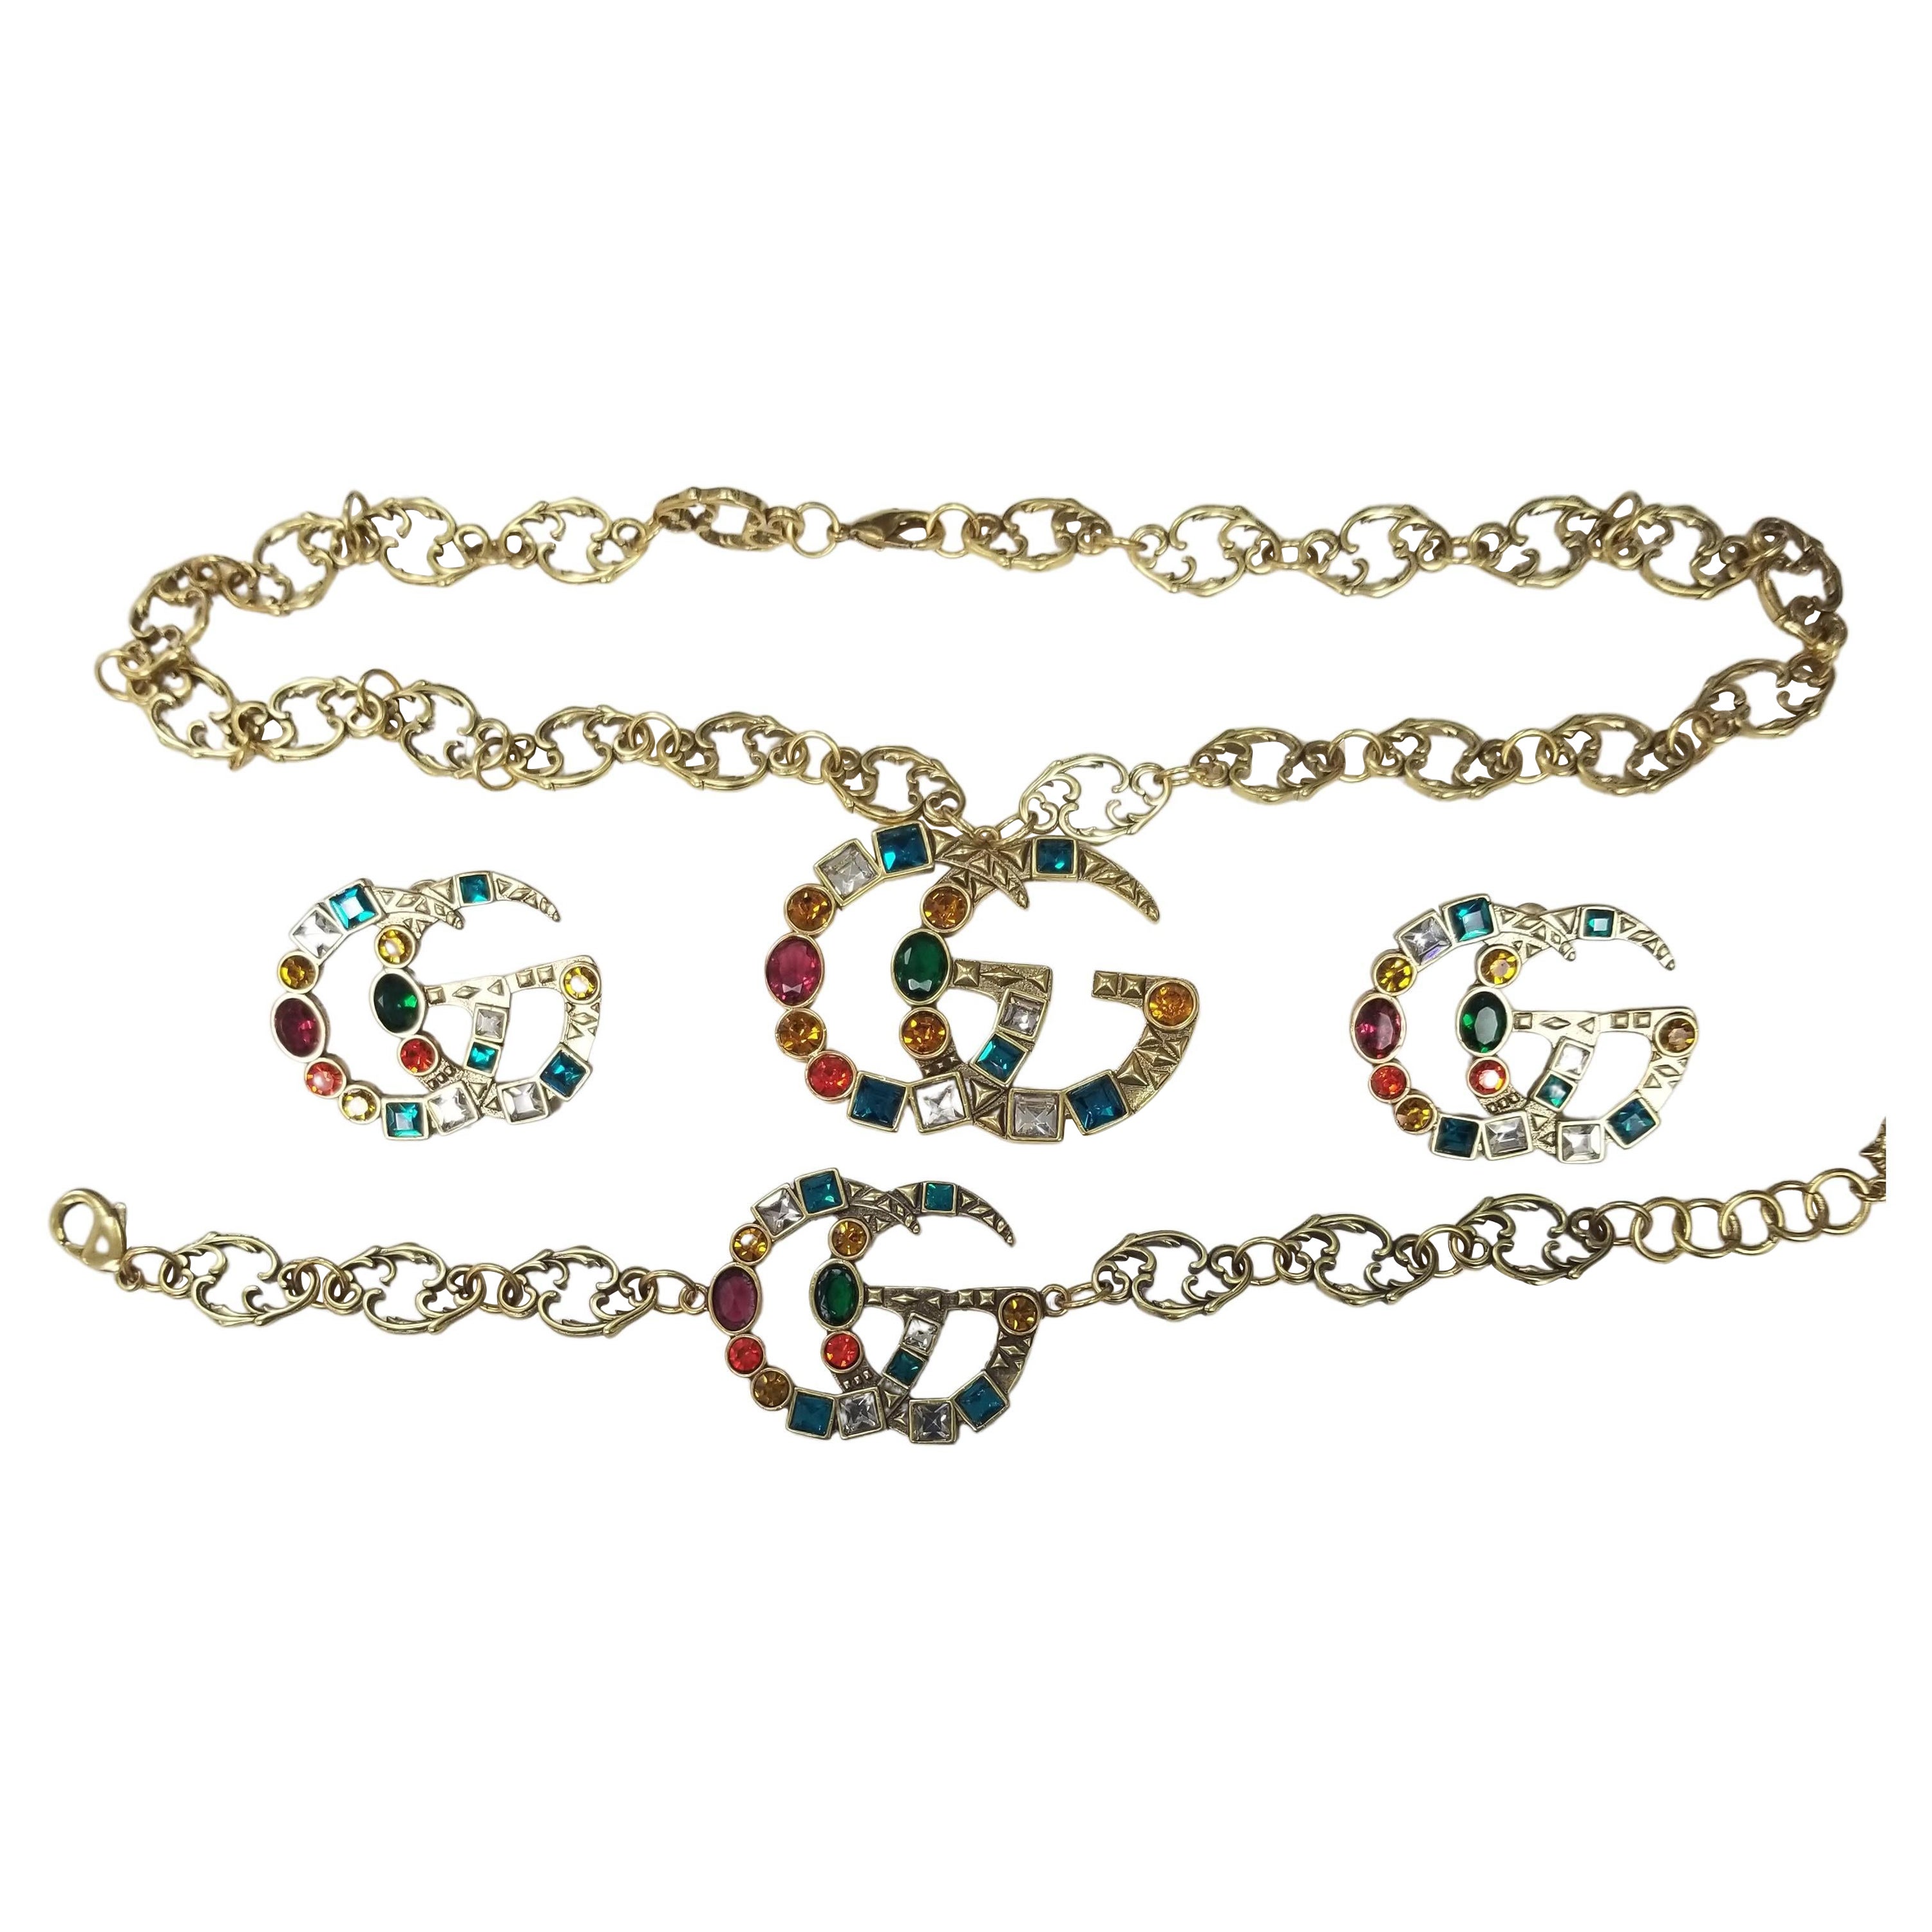 Gucci crystal-embellished Double G clip-on earrings